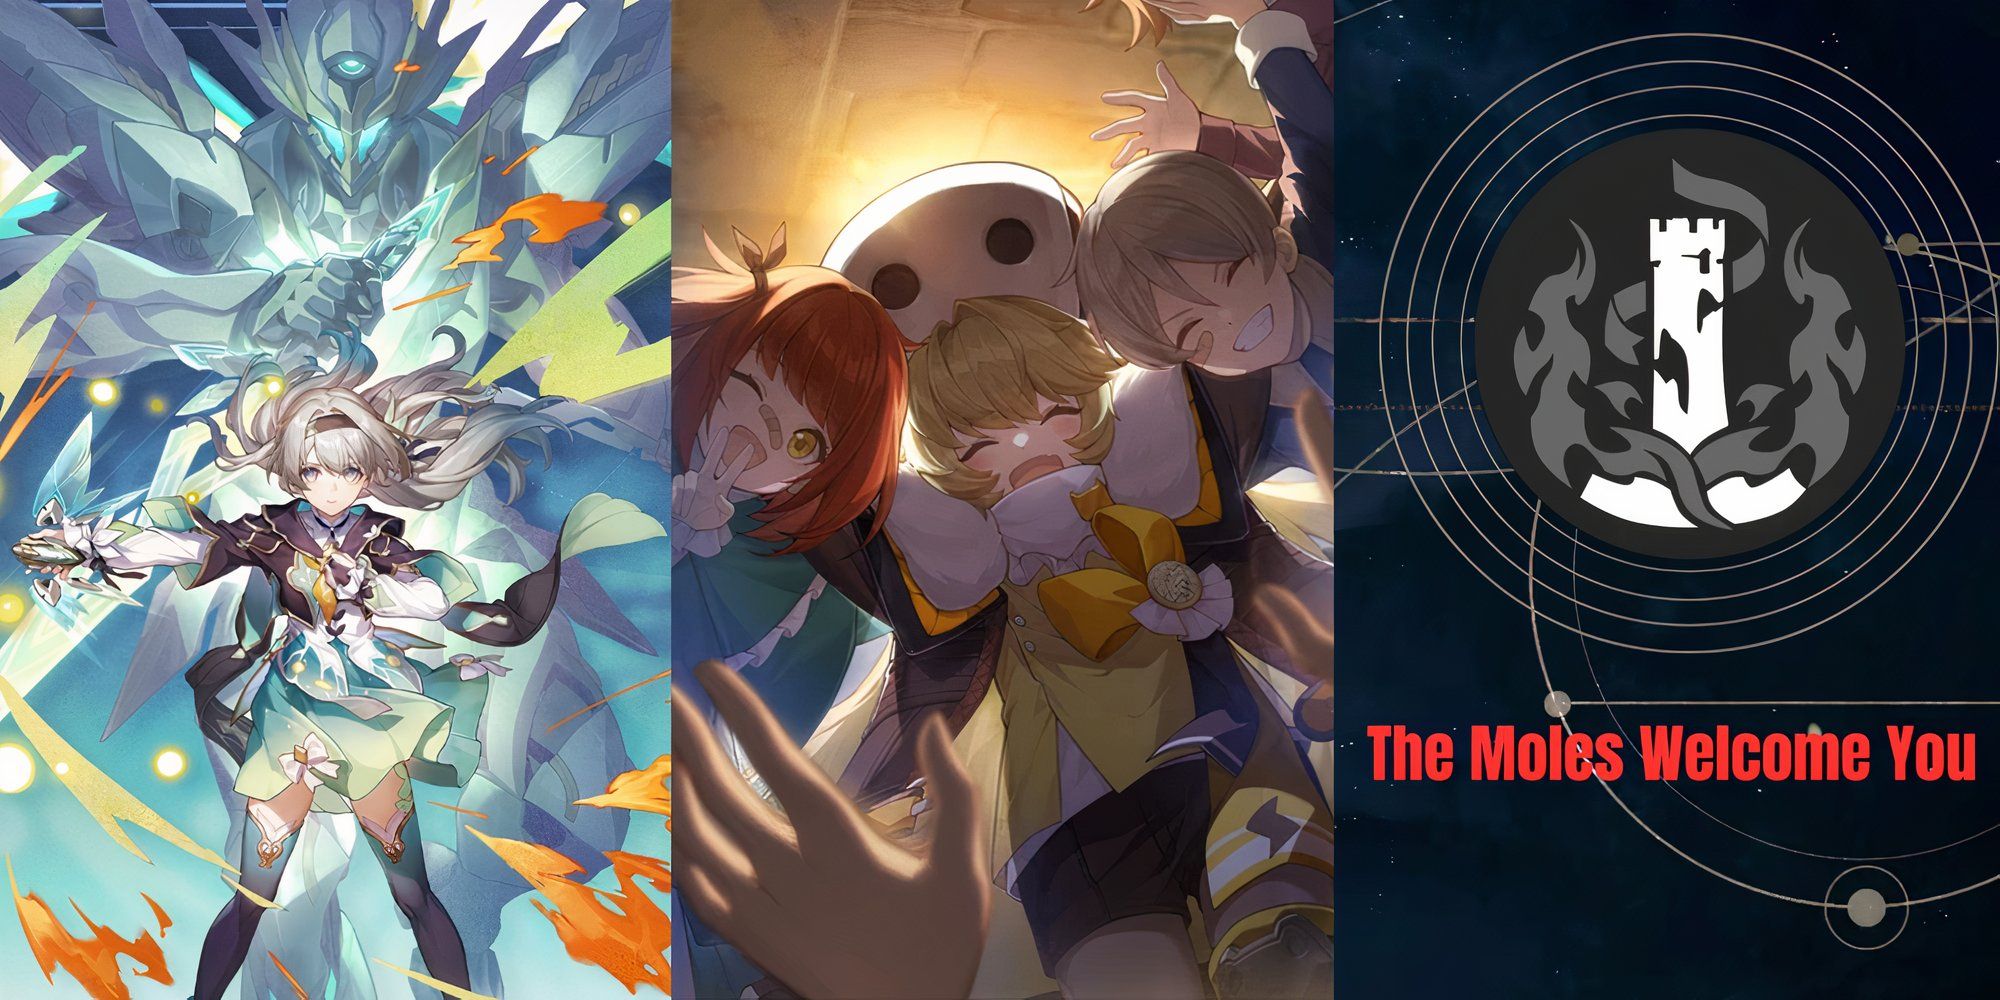 Honkai_ Star Rail – Firefly and The Moles Welcome You